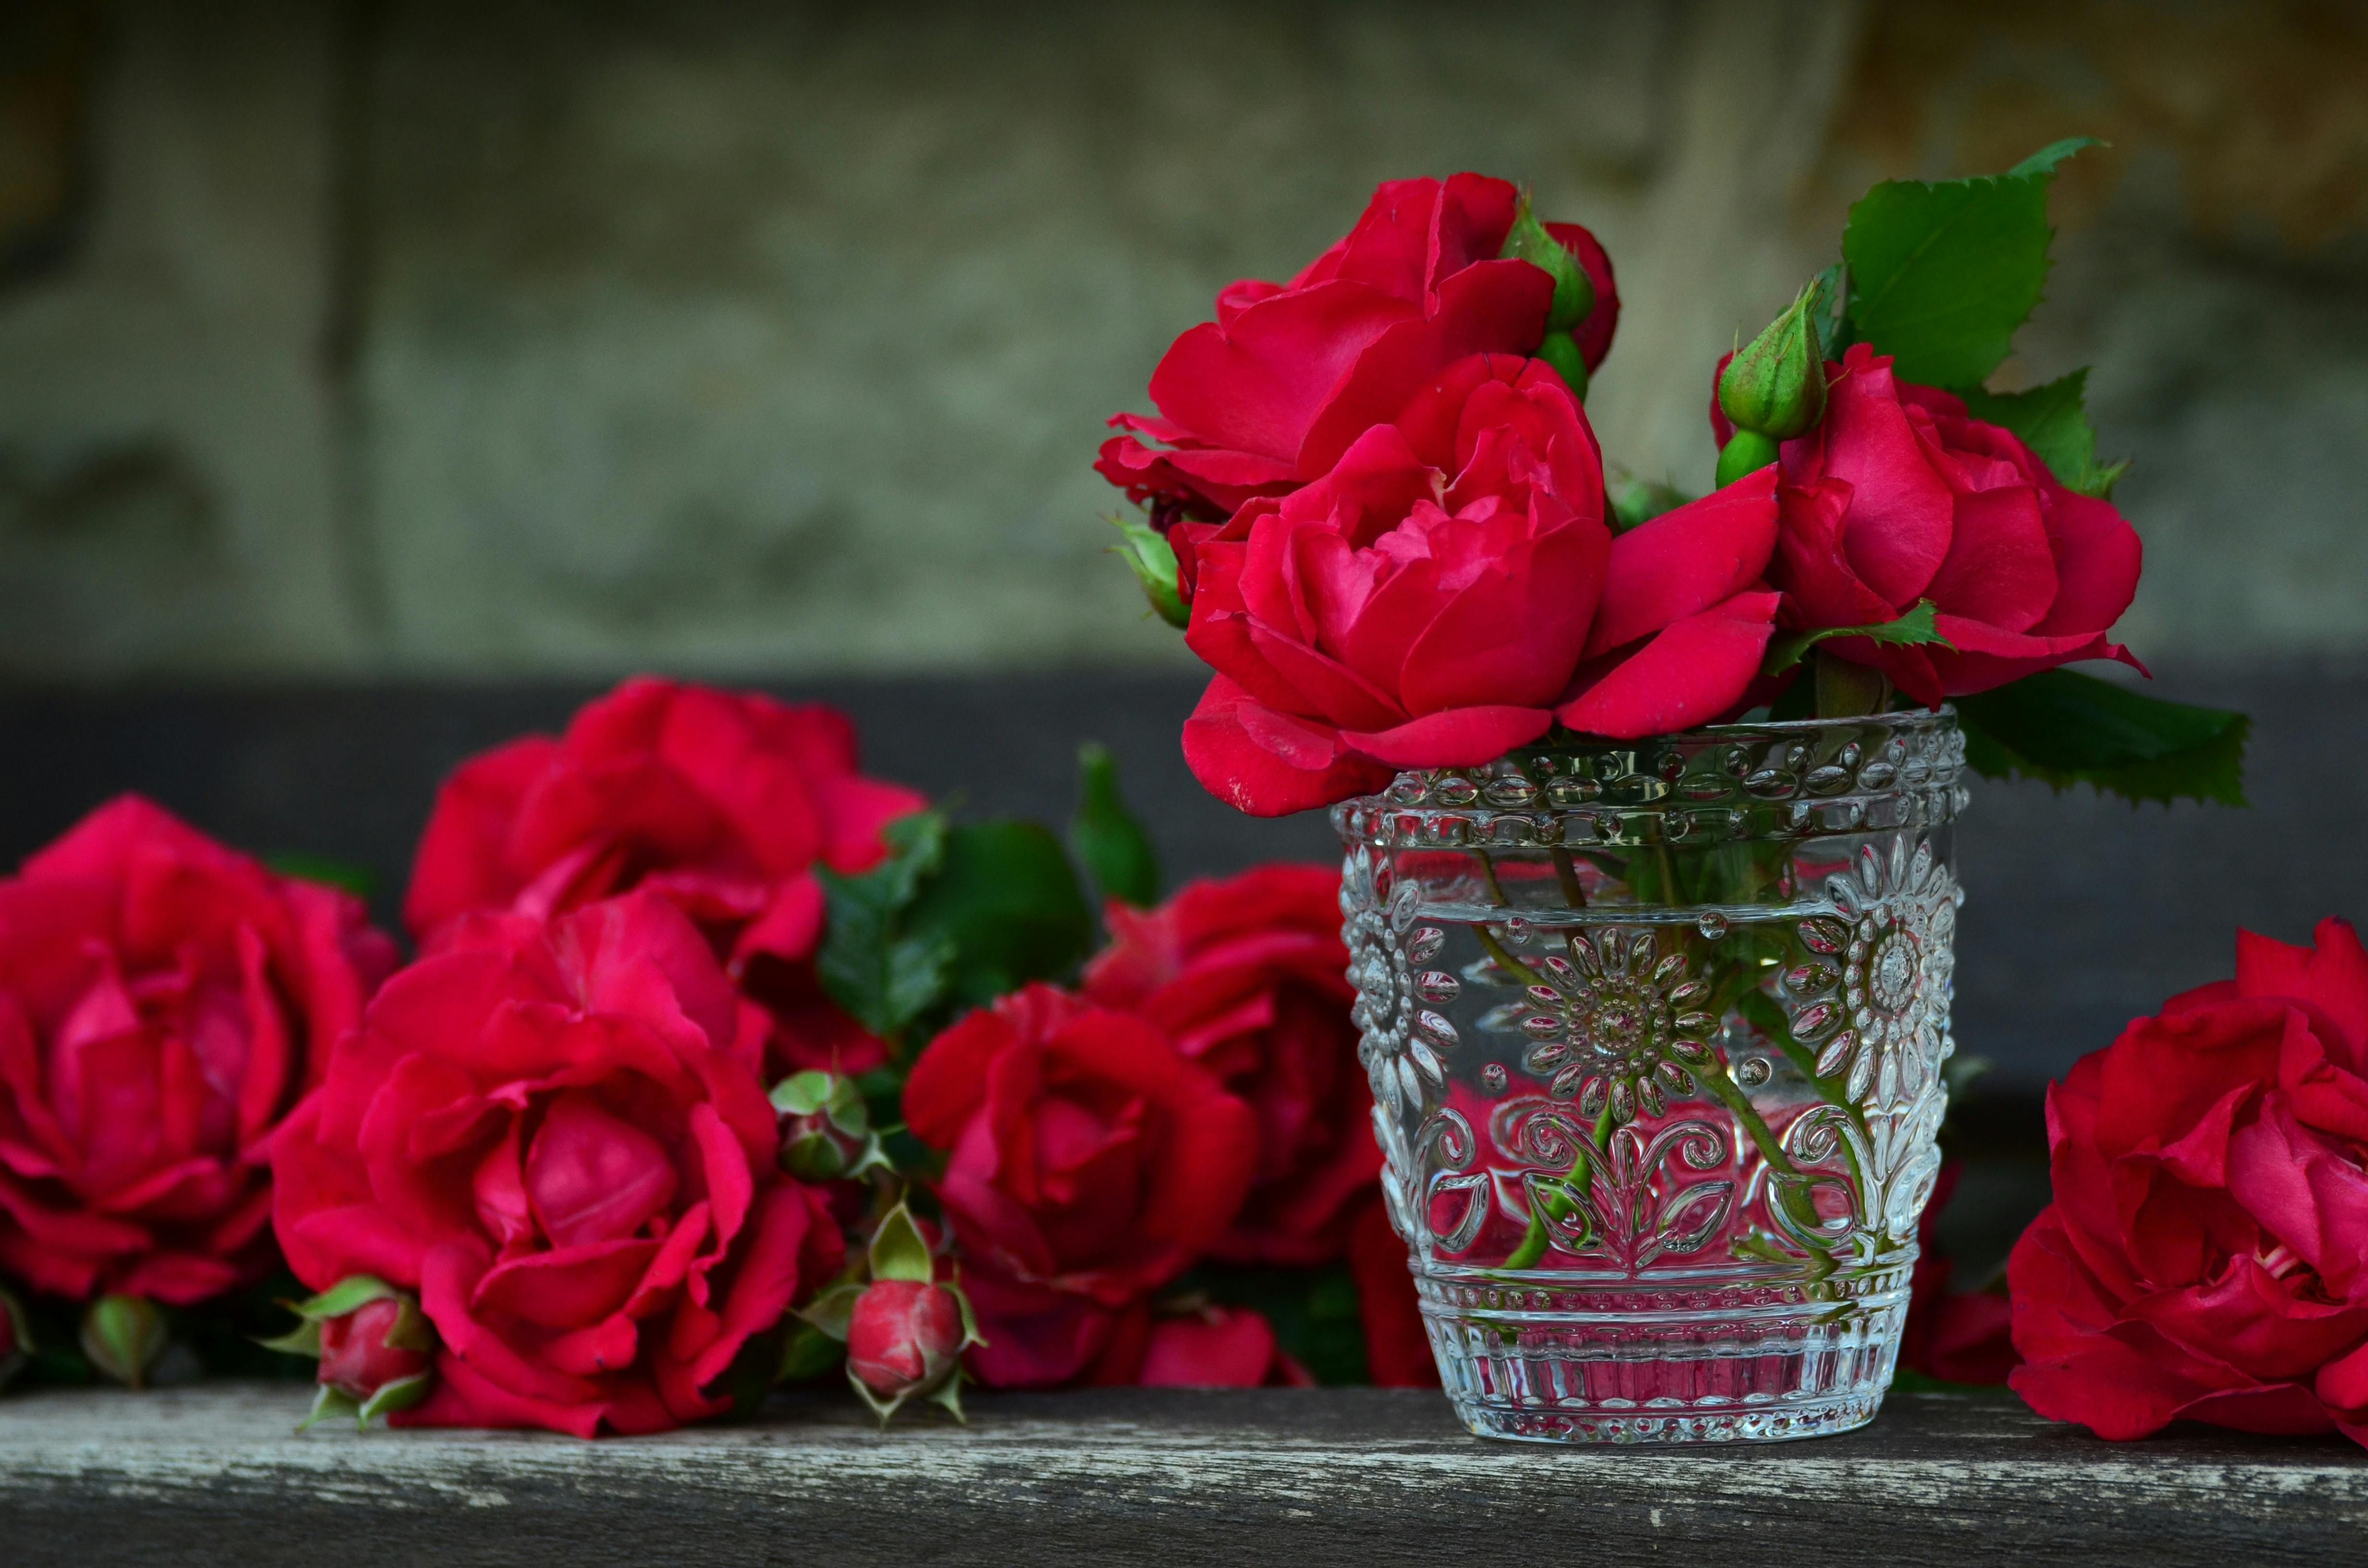 roses-red-roses-bouquet-of-roses-glass.jpg (4928×3264)